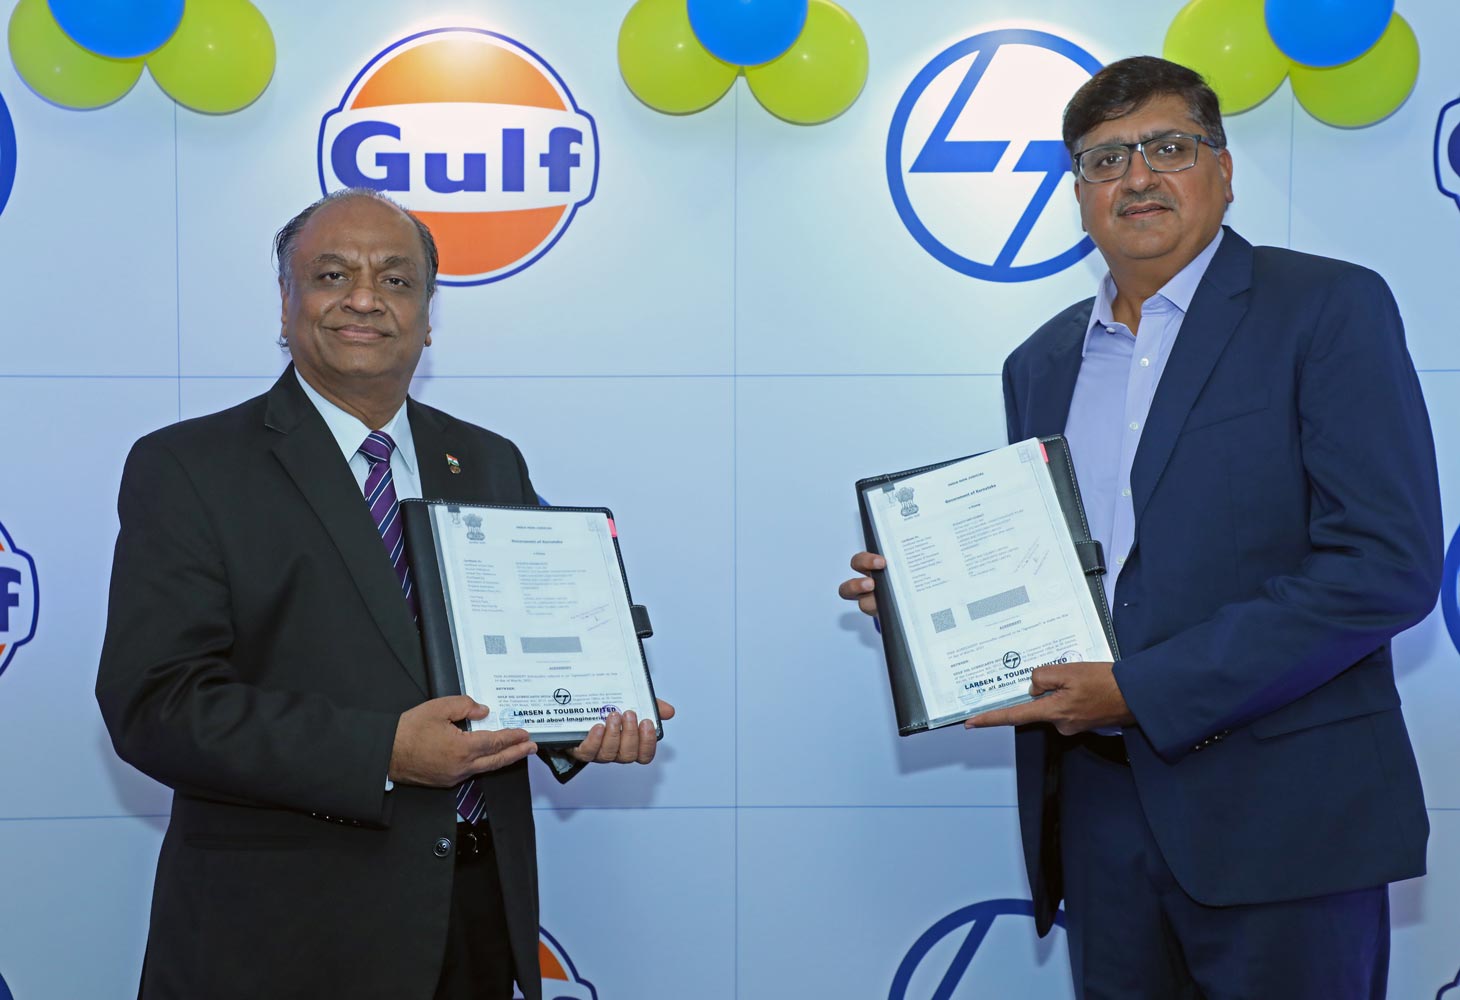 Gulf Oil and Larsen & Toubro launch genuine oils